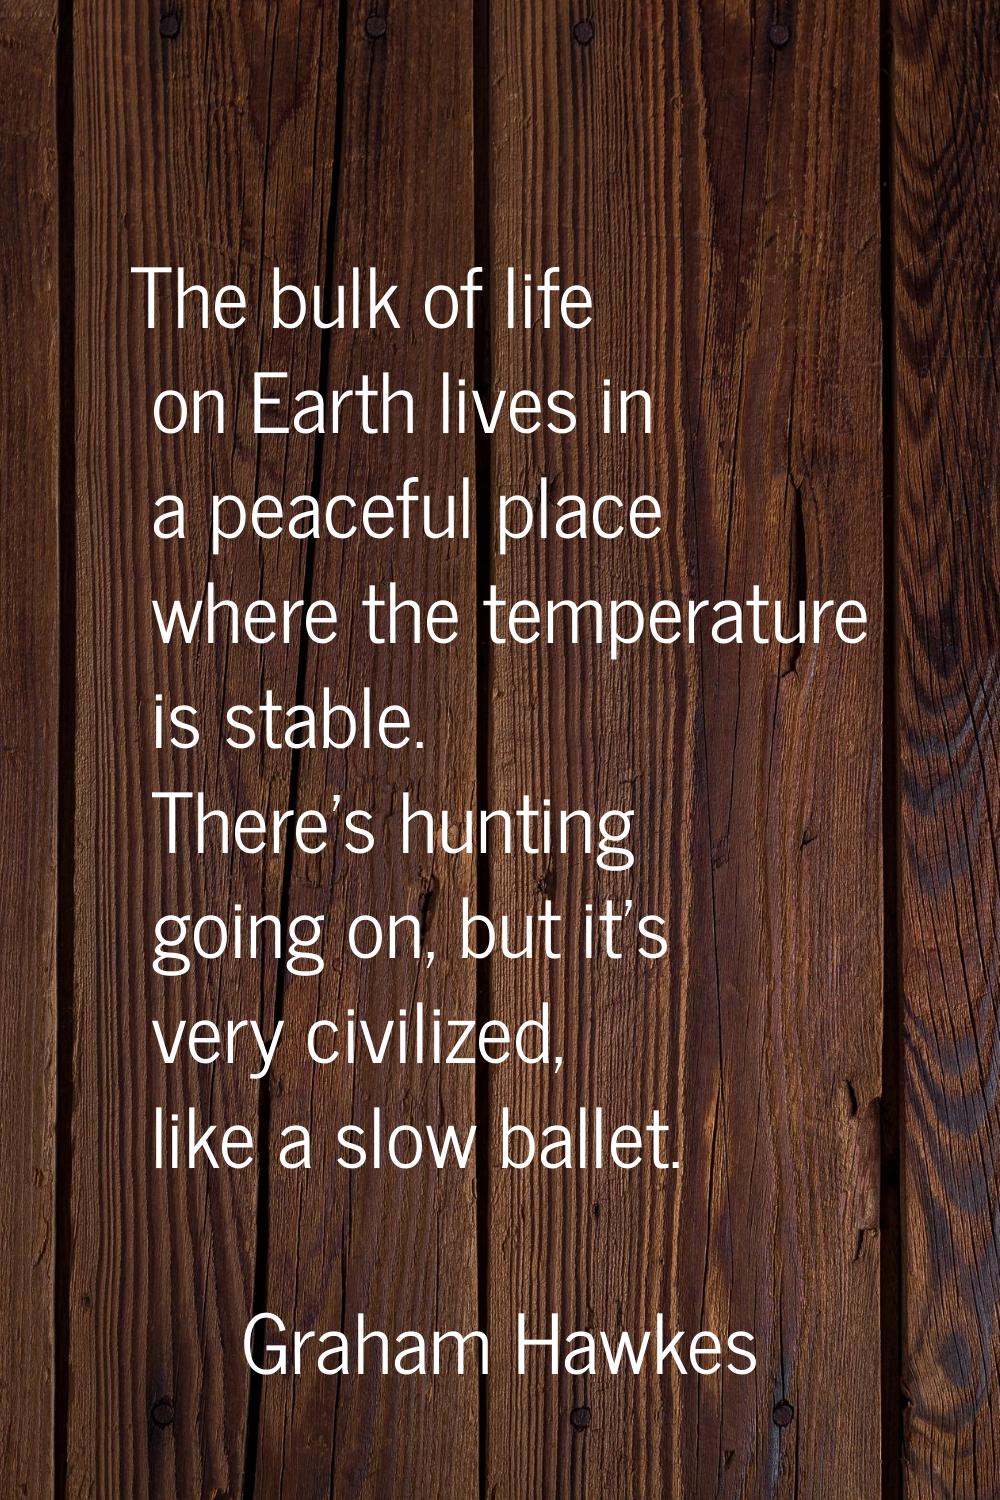 The bulk of life on Earth lives in a peaceful place where the temperature is stable. There's huntin